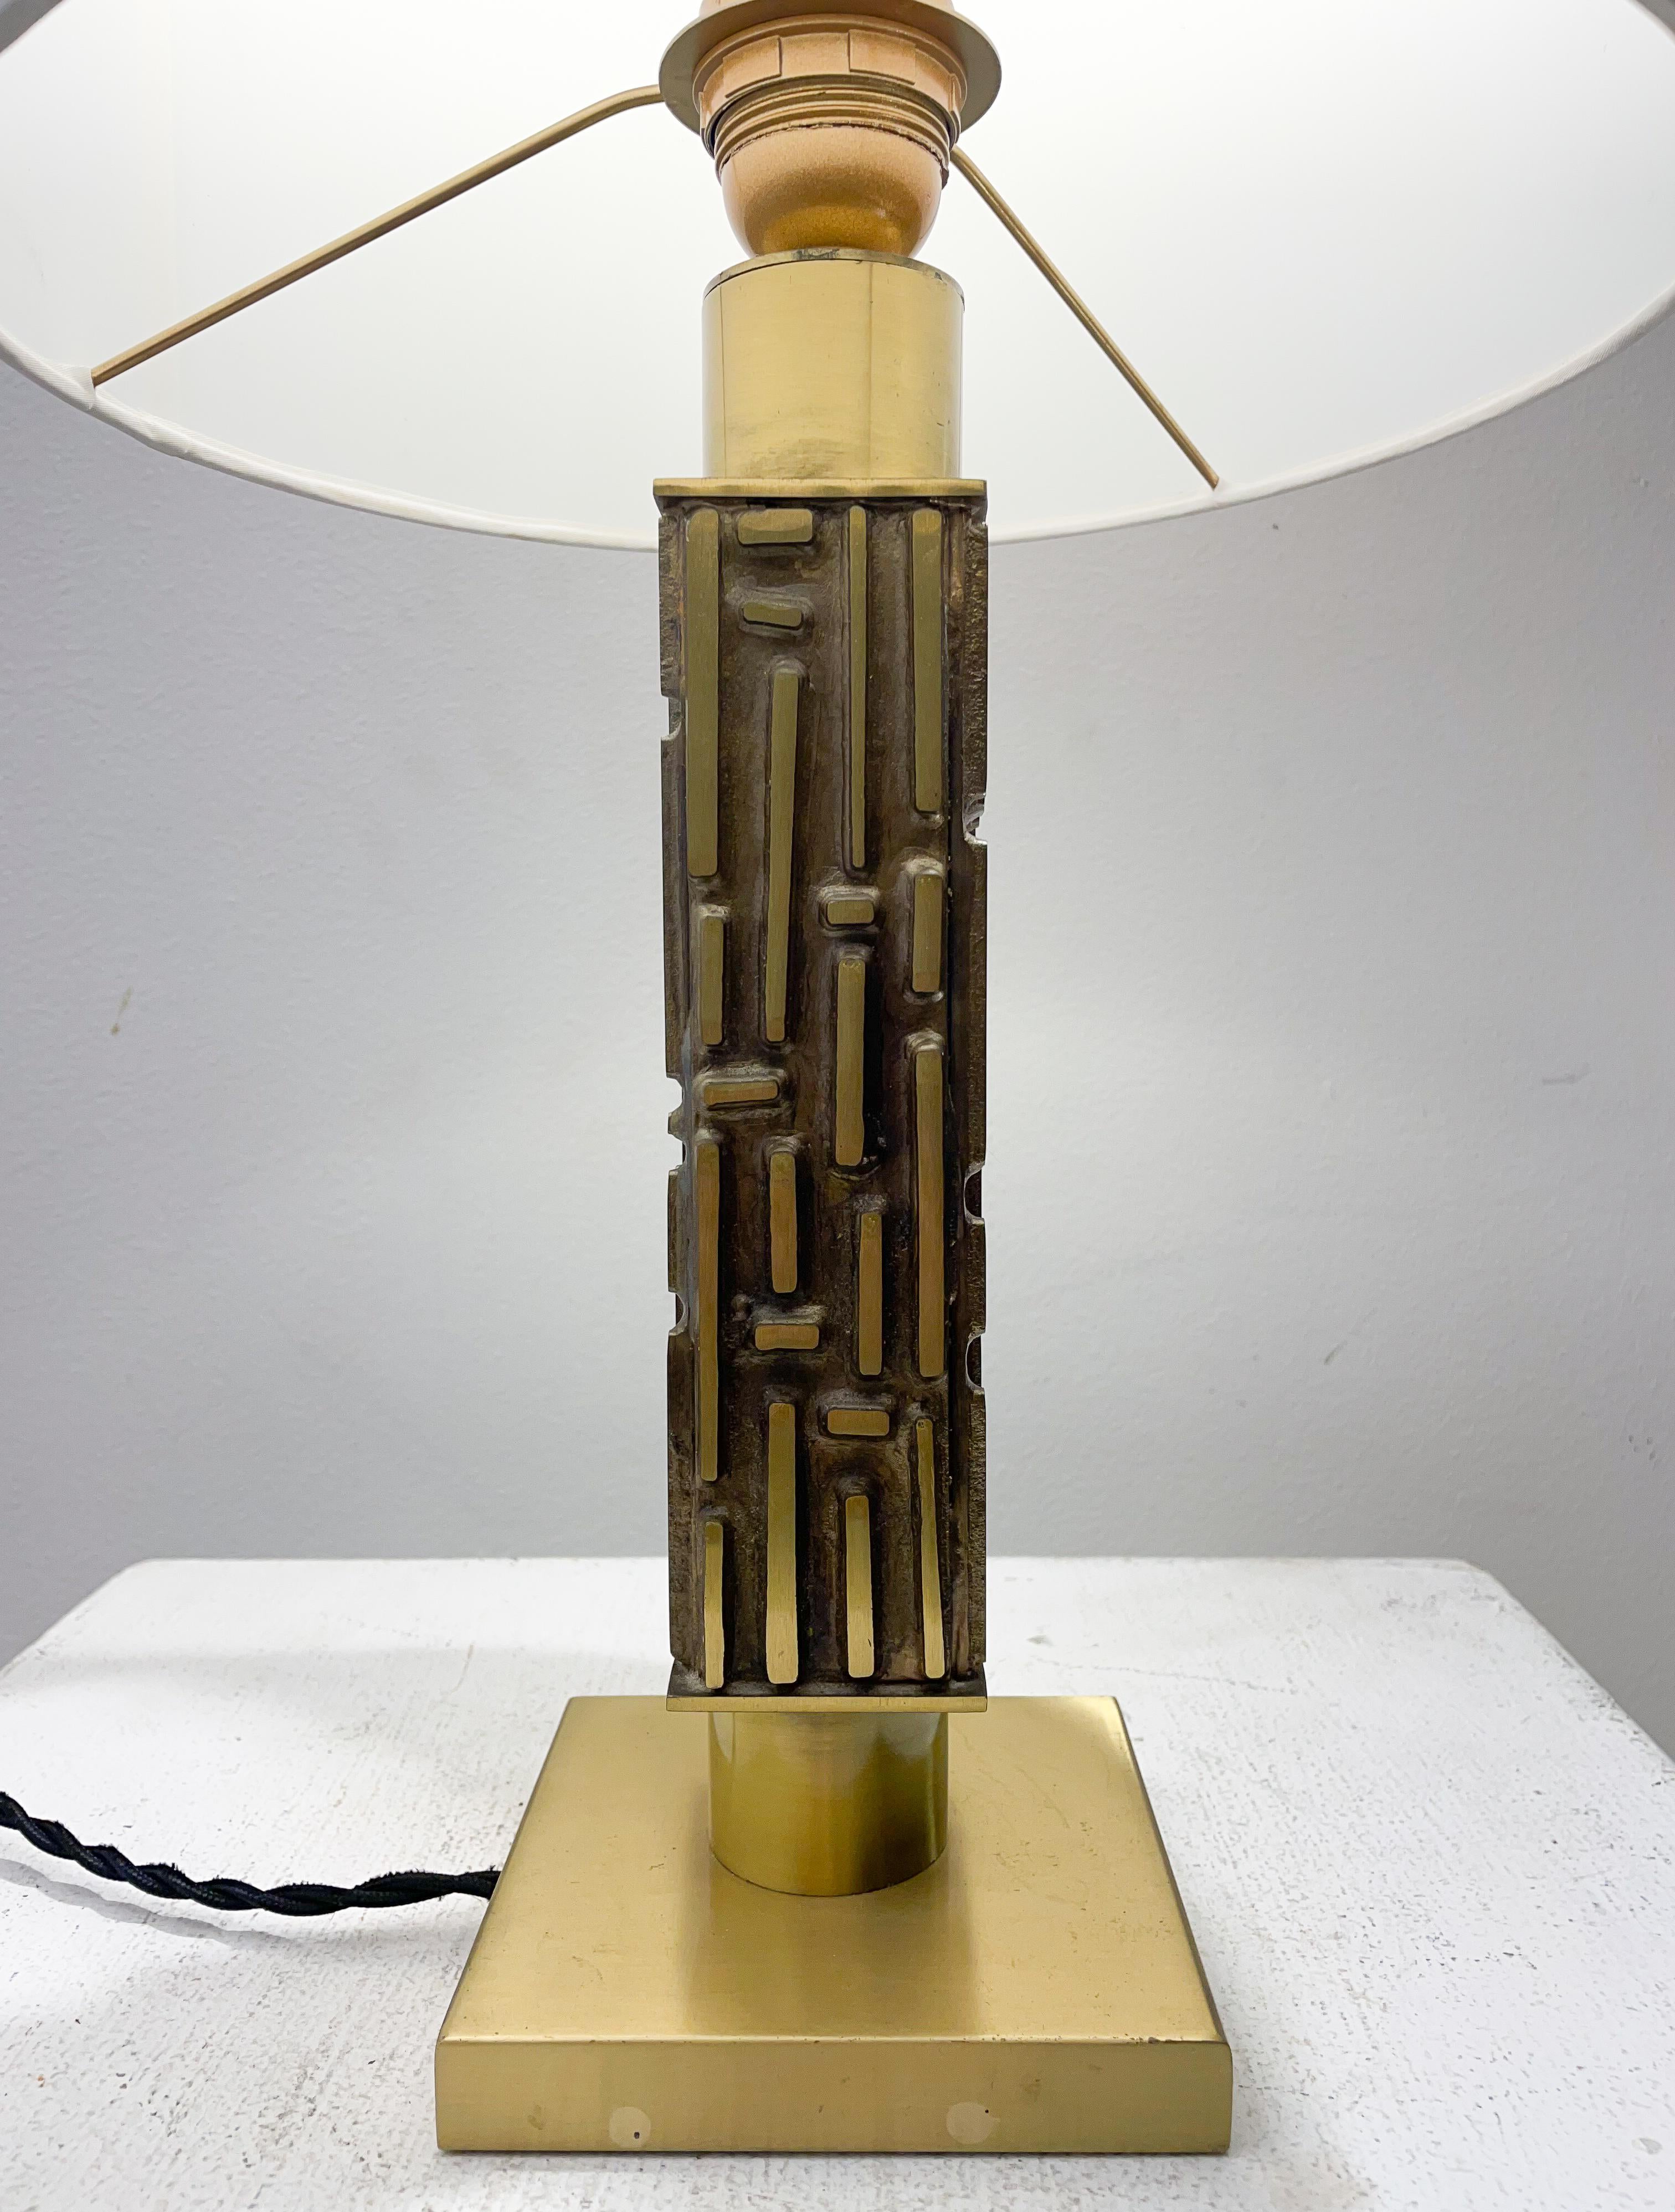 Mid-Century Brass and Bronze Table lamp by Luciano Frigerio, Italy, 1970s

New Lampshade